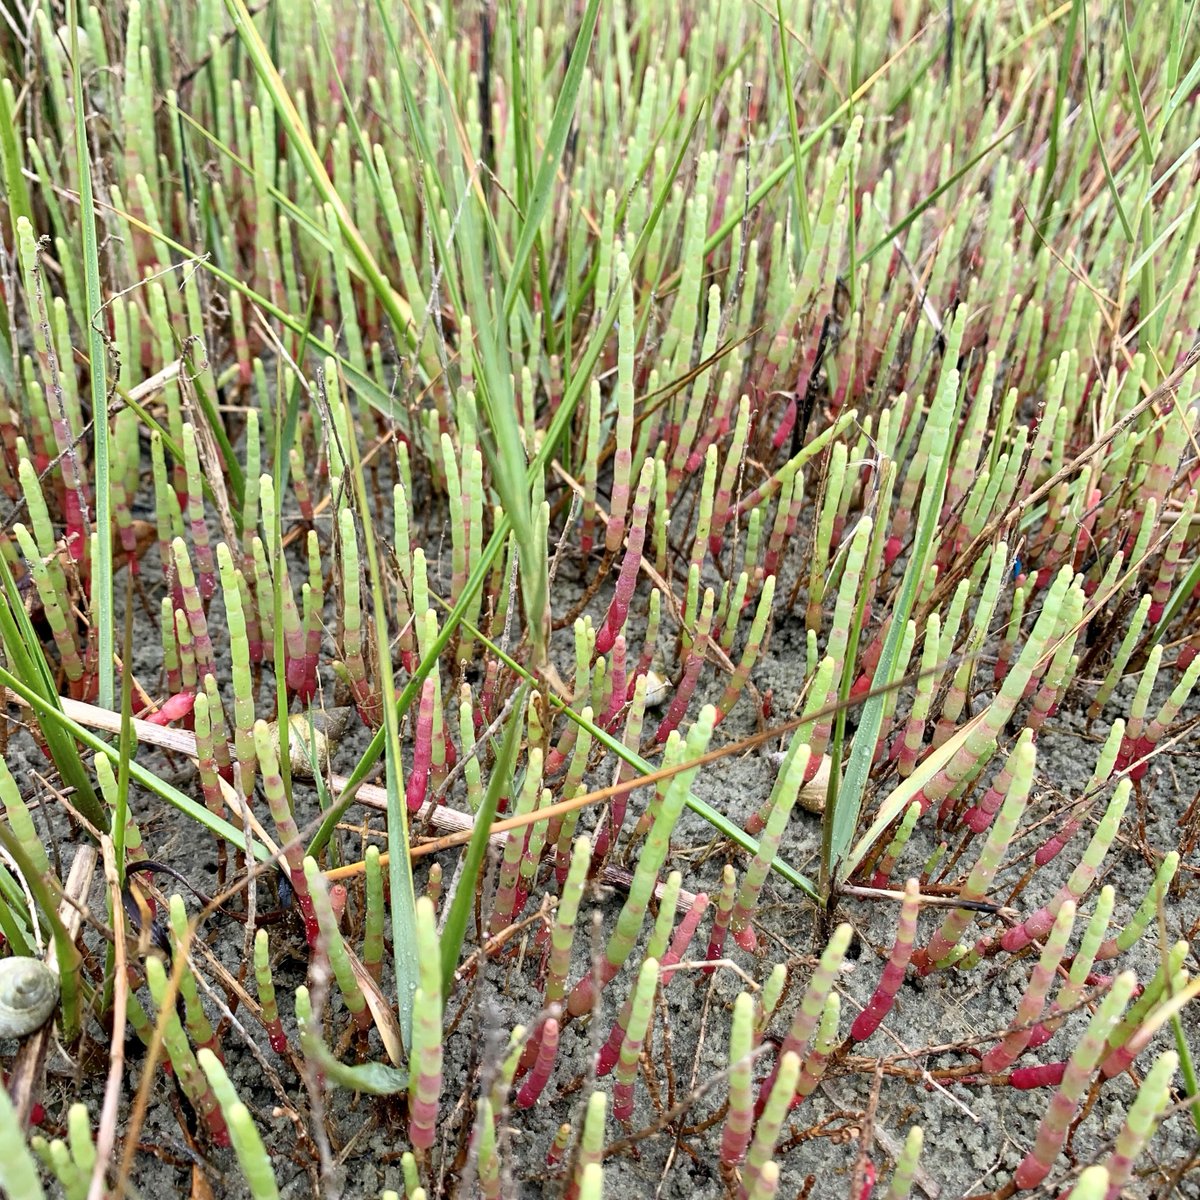 Glasswort, AKA pickleweed, is a tough halophyte plant that thrives in high-salinity areas in the intertidal zone. Vibrant green during the summer, it has a stunning red transformation in the fall.  If you find it, you can eat it! #edibleplants #marshlife #glasswort #NCNERR